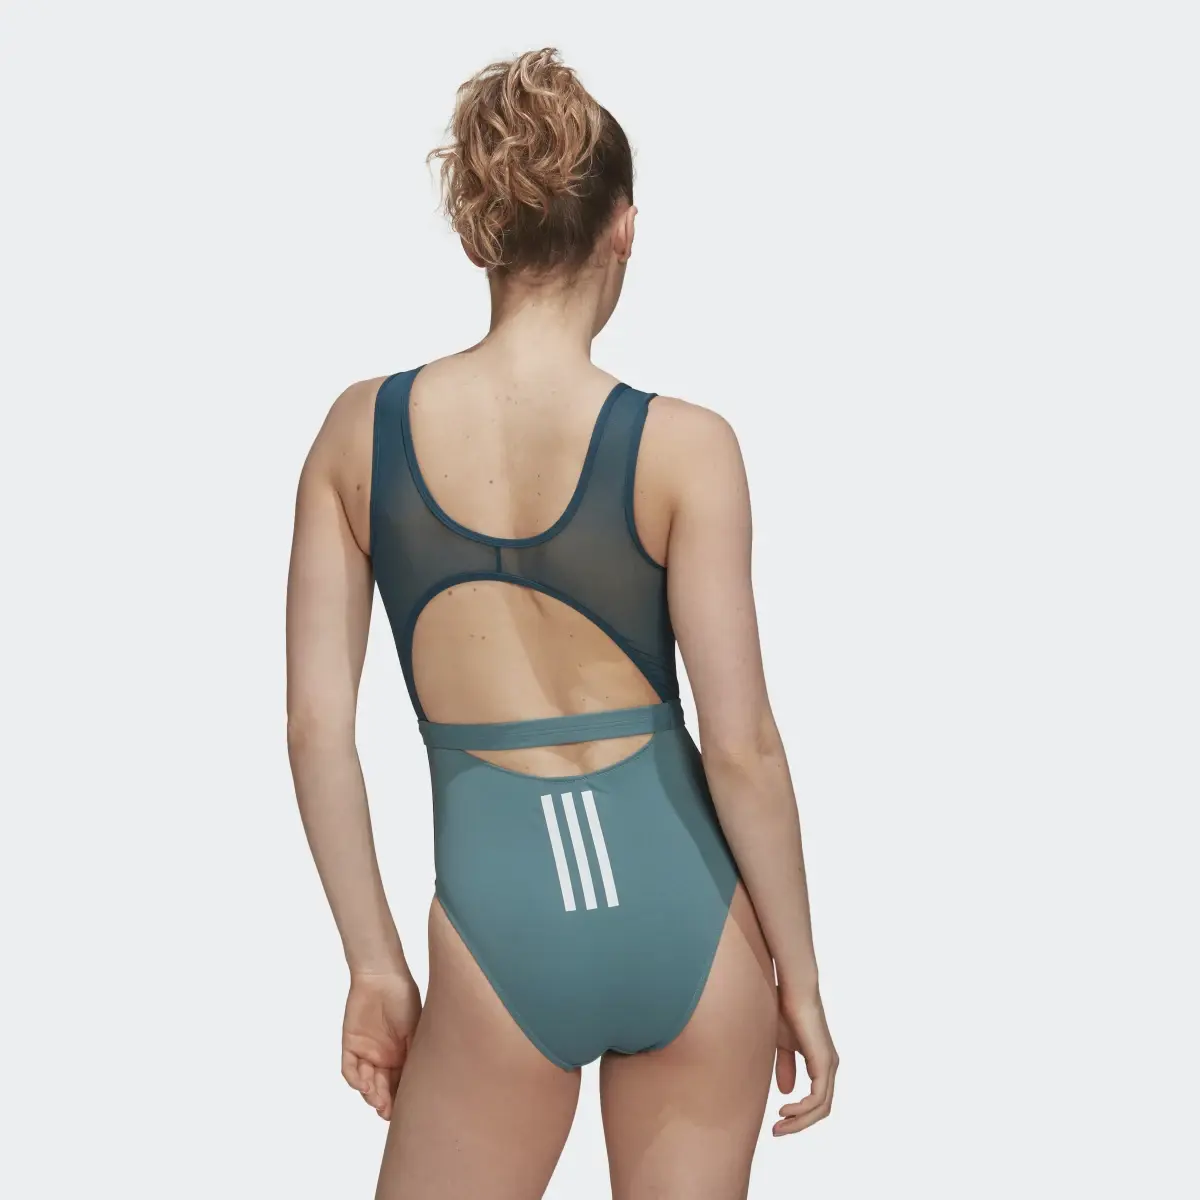 Adidas Parley Swimsuit. 3